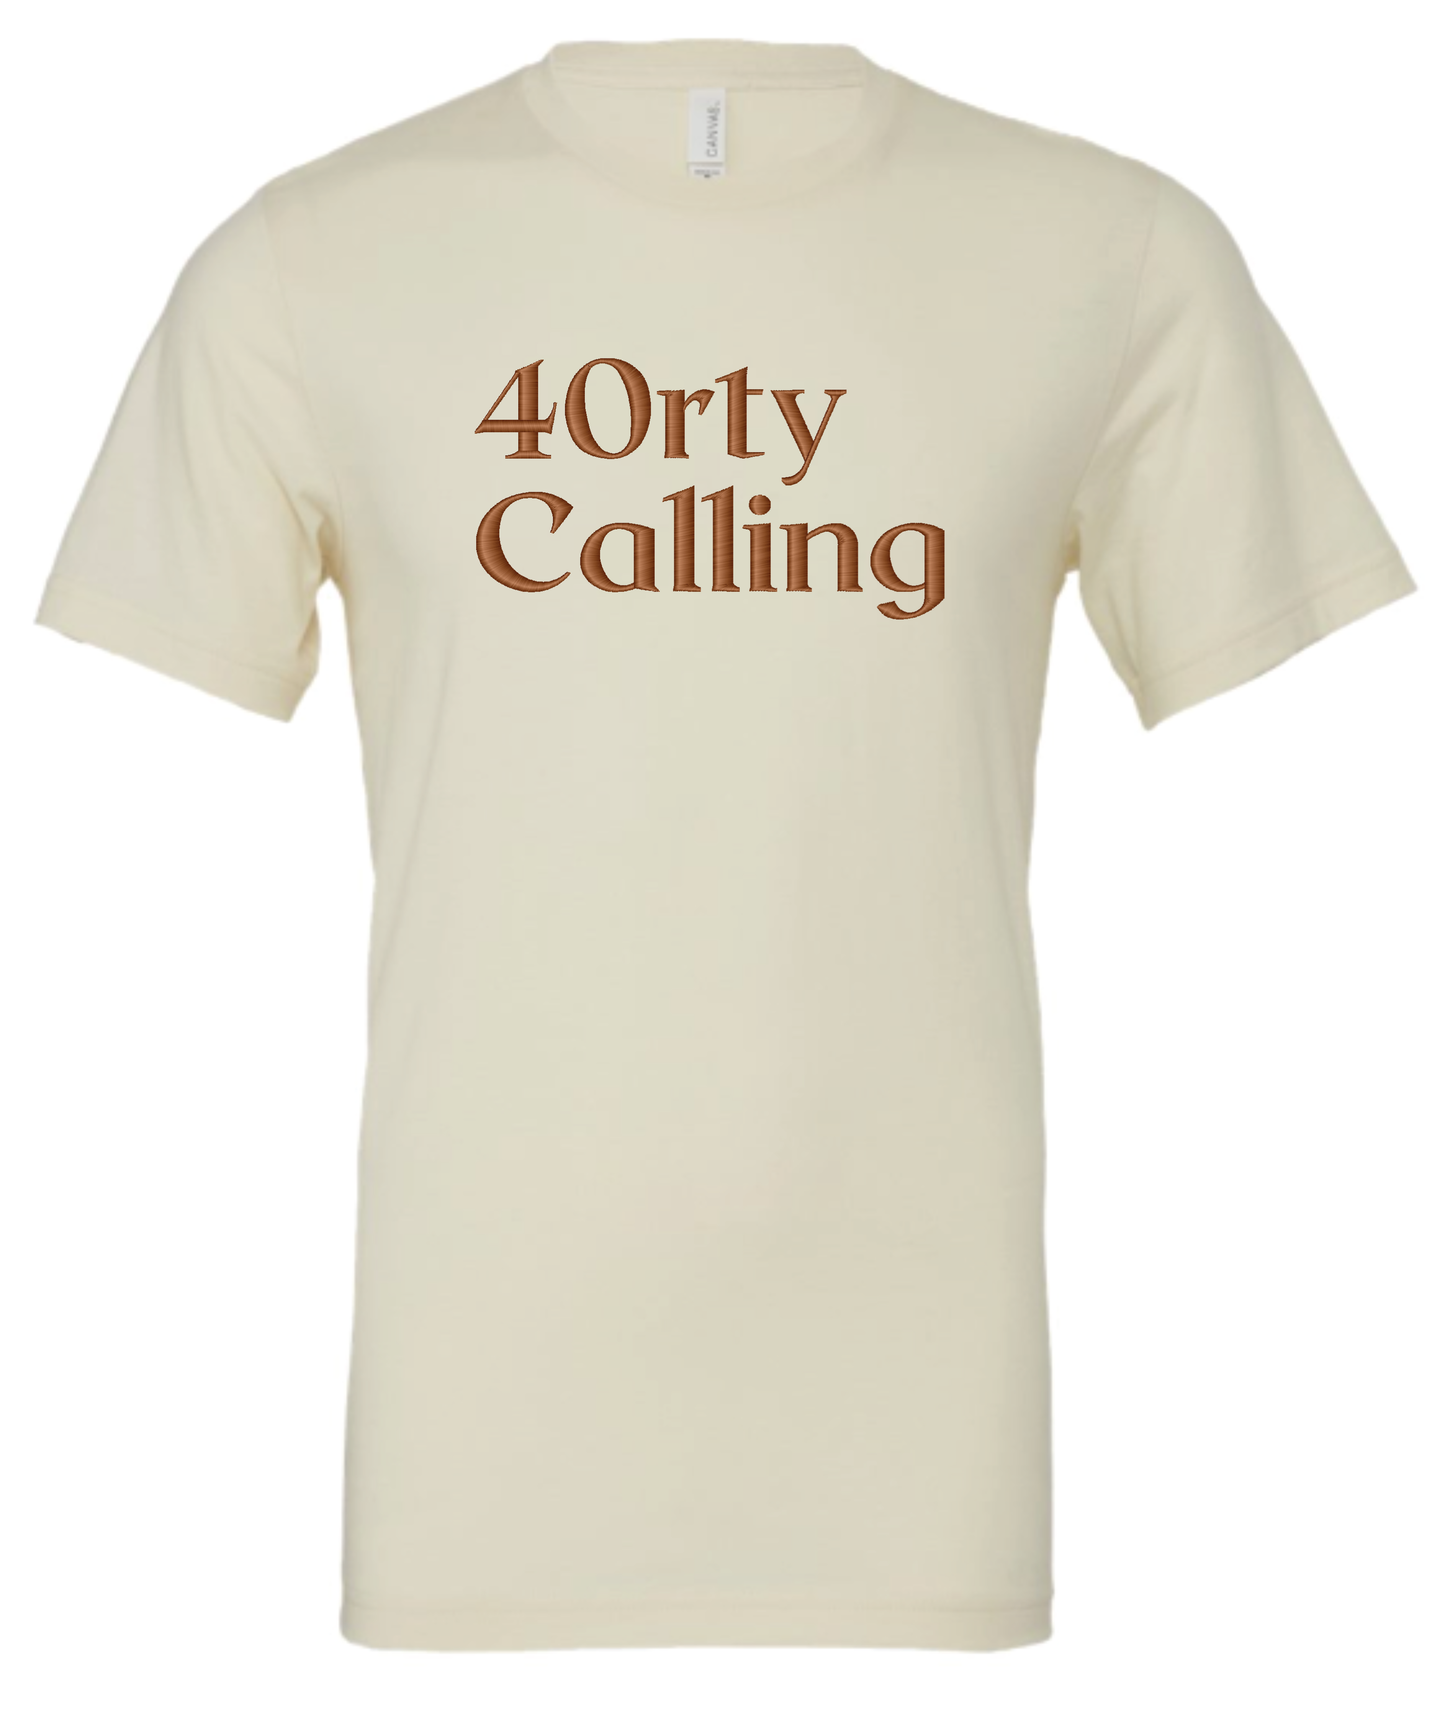 Signature 40rty Calling Embroidered Shirt